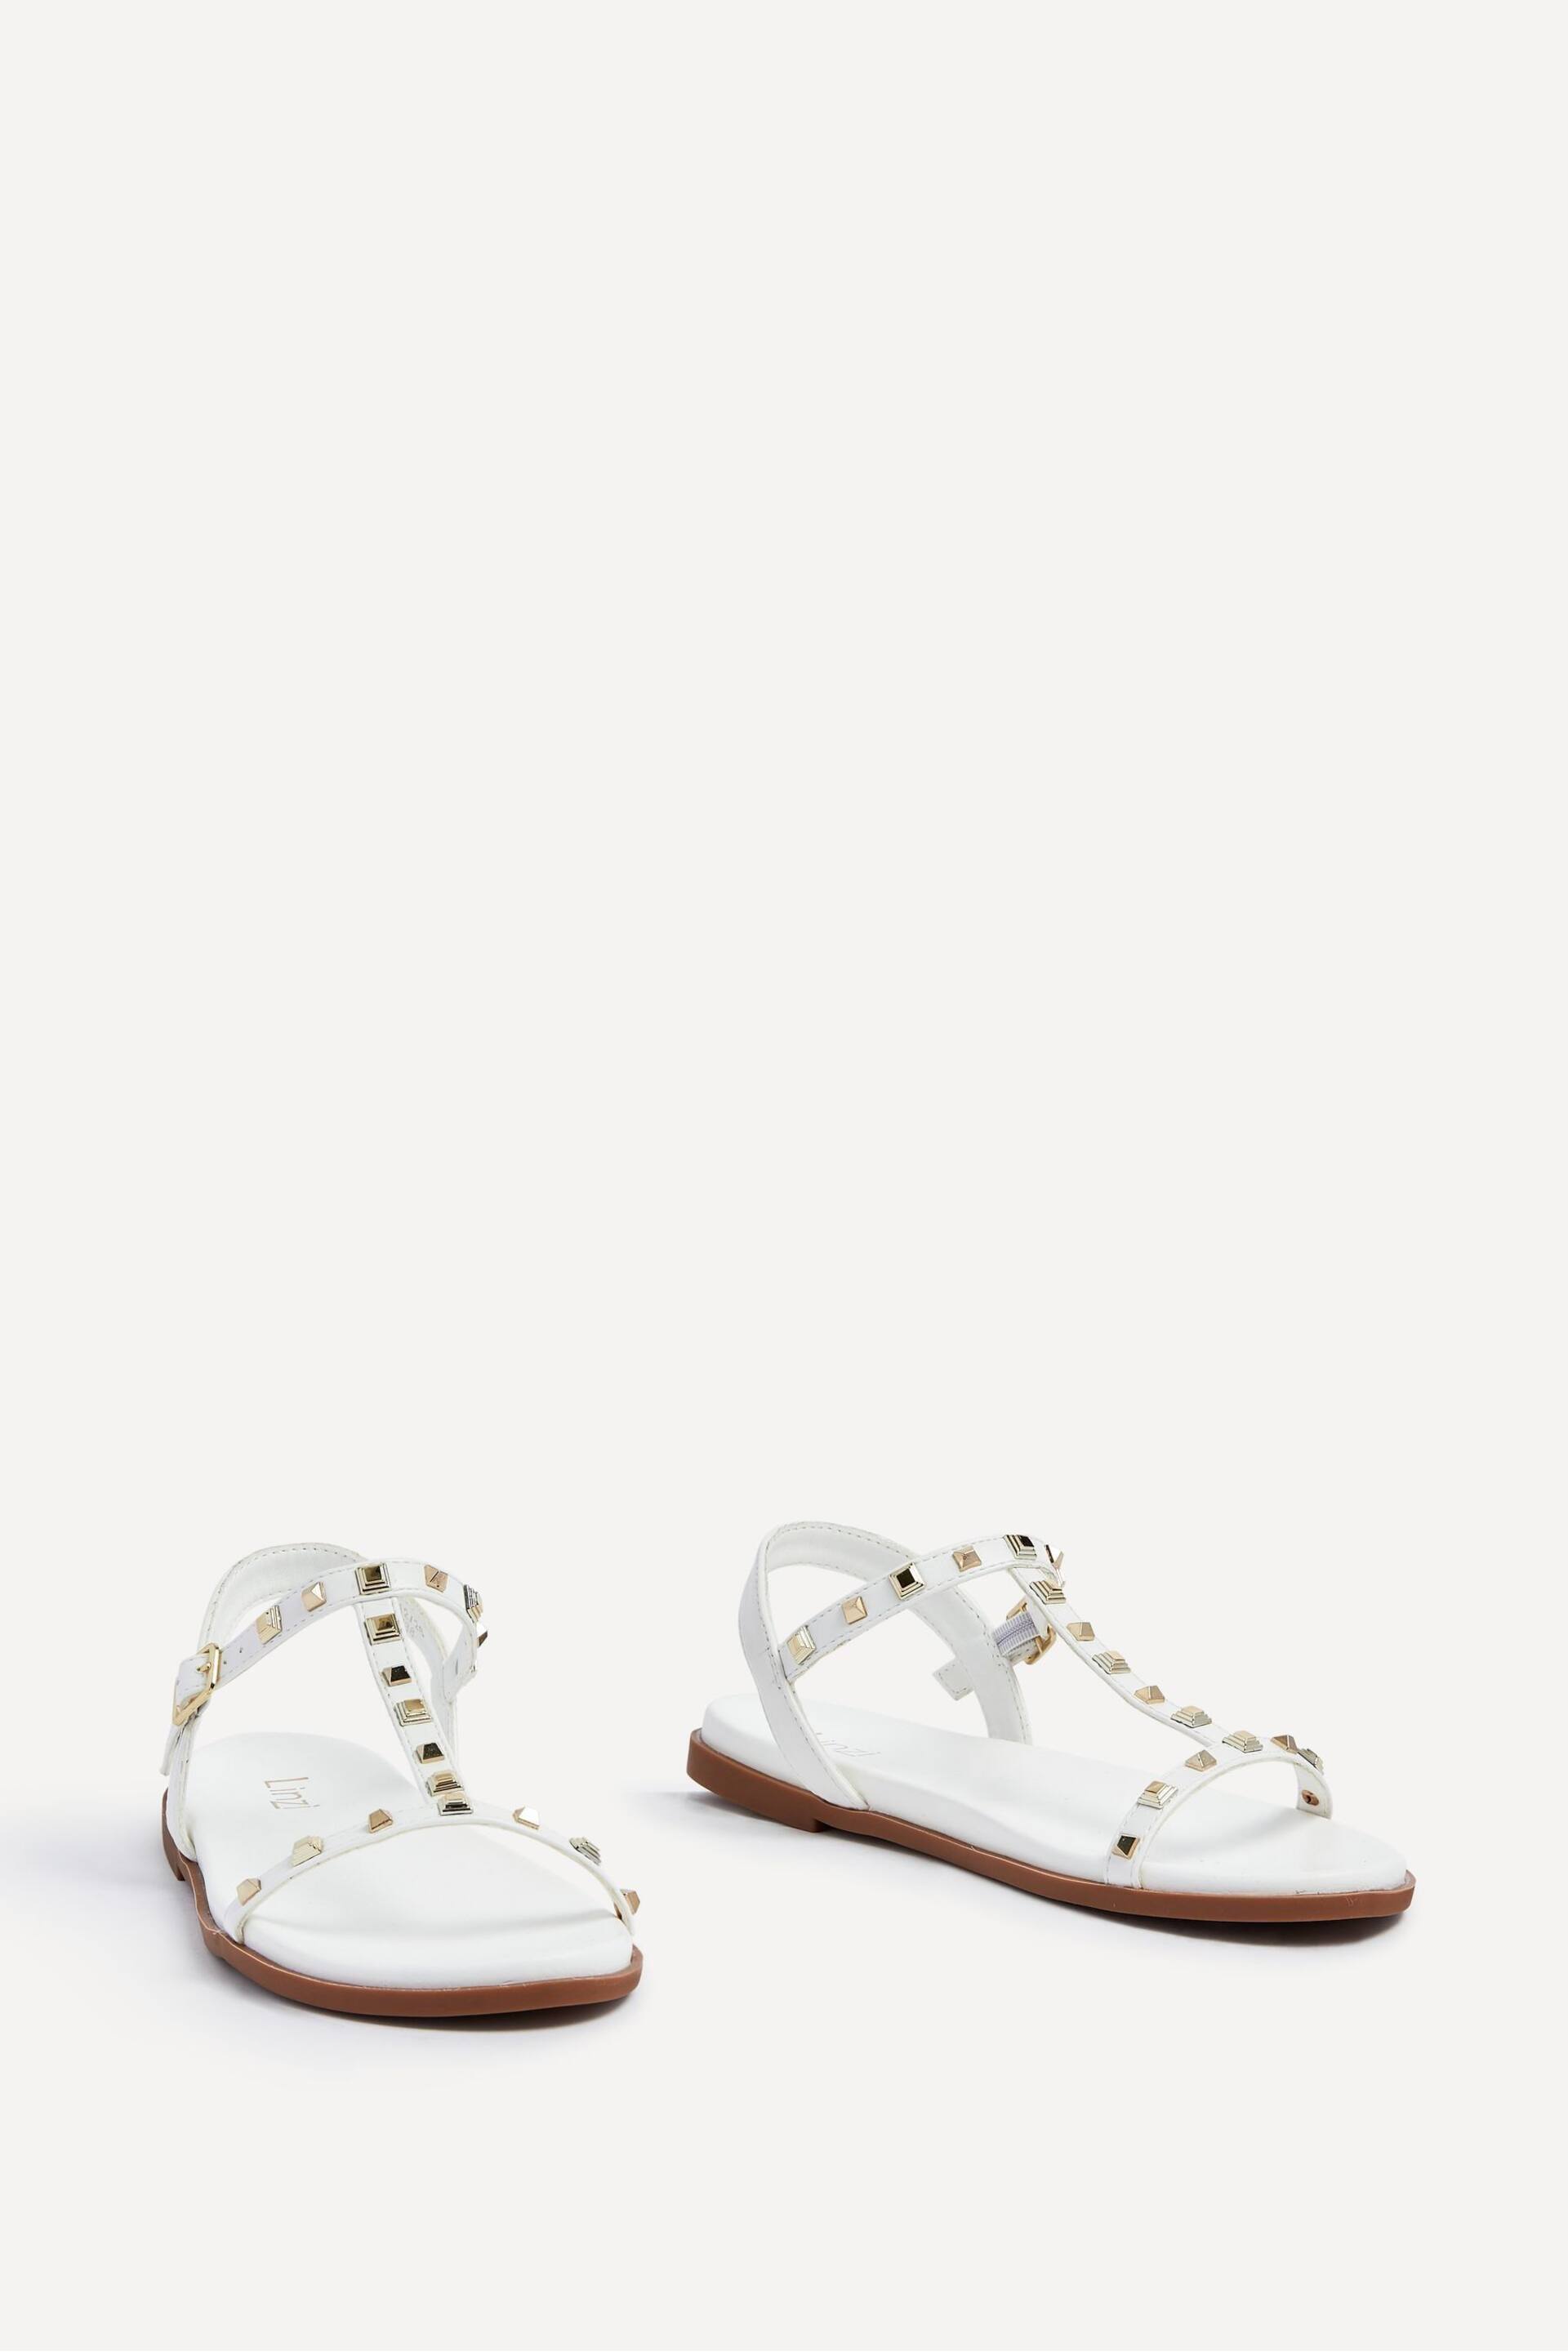 Linzi White Bliss T-Post Flat Sandals With Stud Embellishment - Image 3 of 5